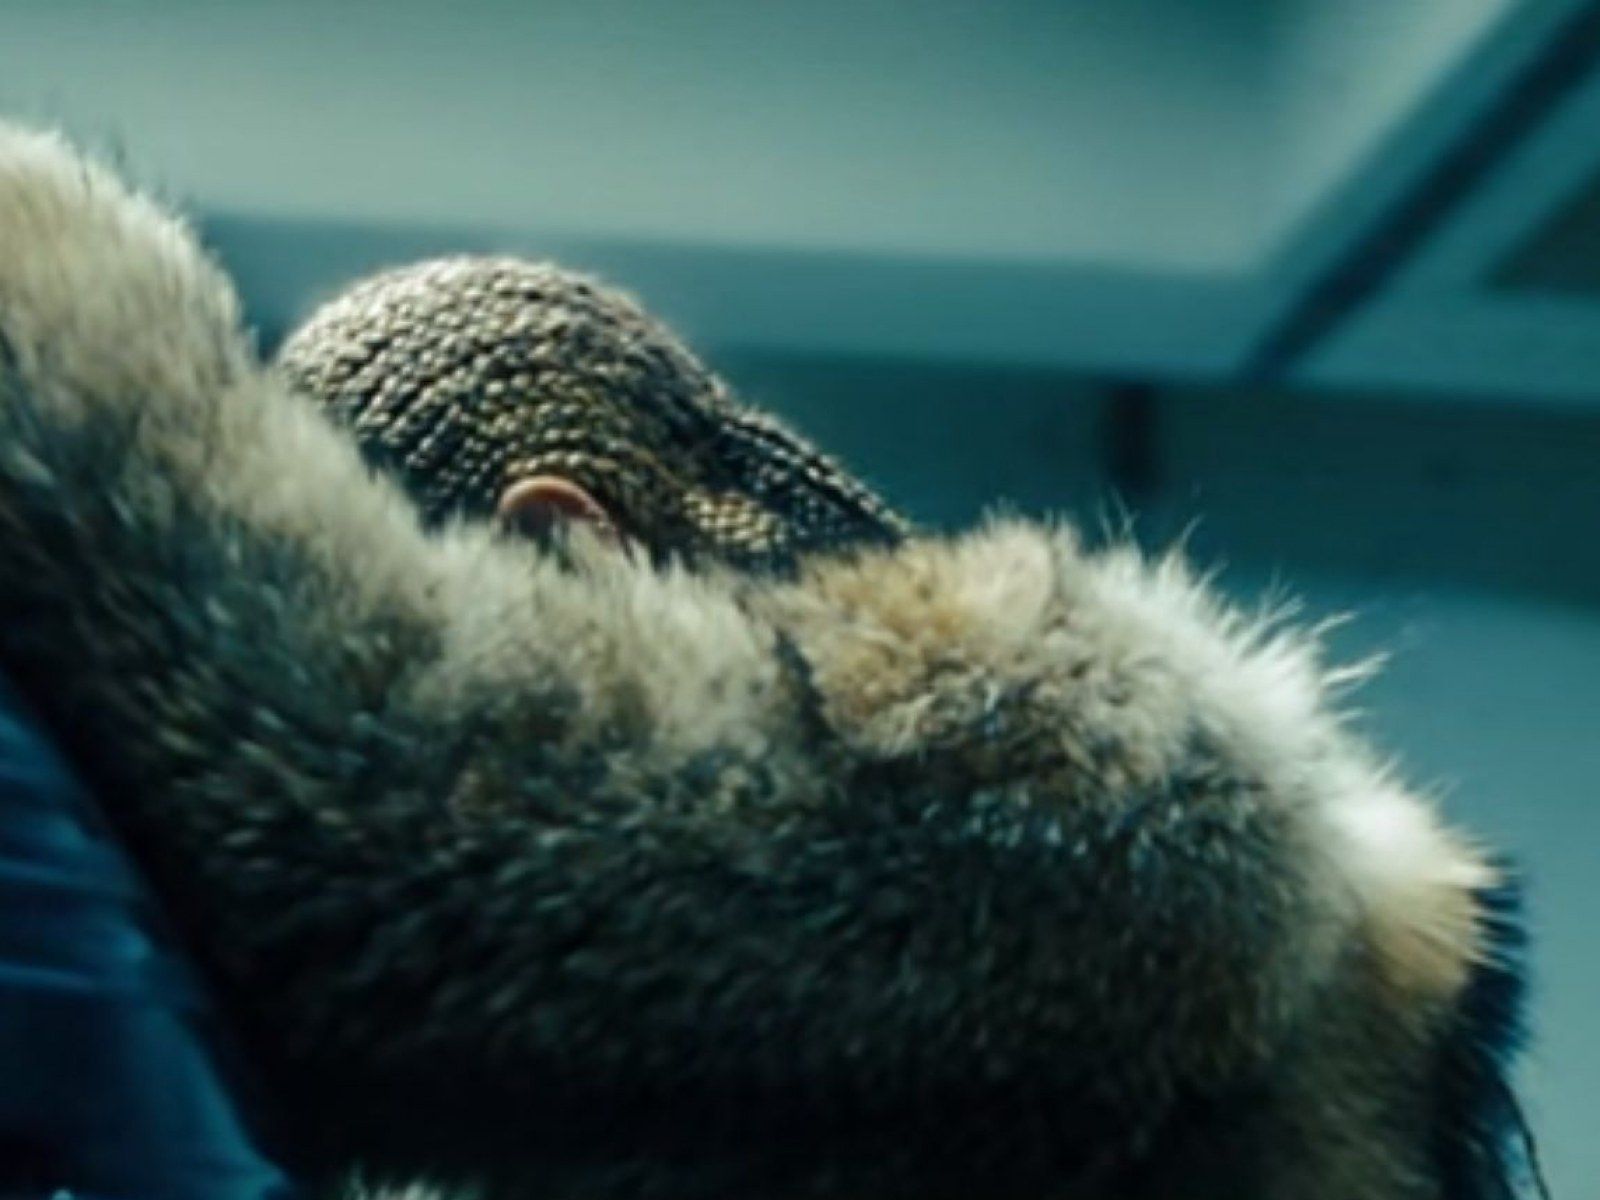 Watch: So Just What is Beyoncé's 'Lemonade' All About?